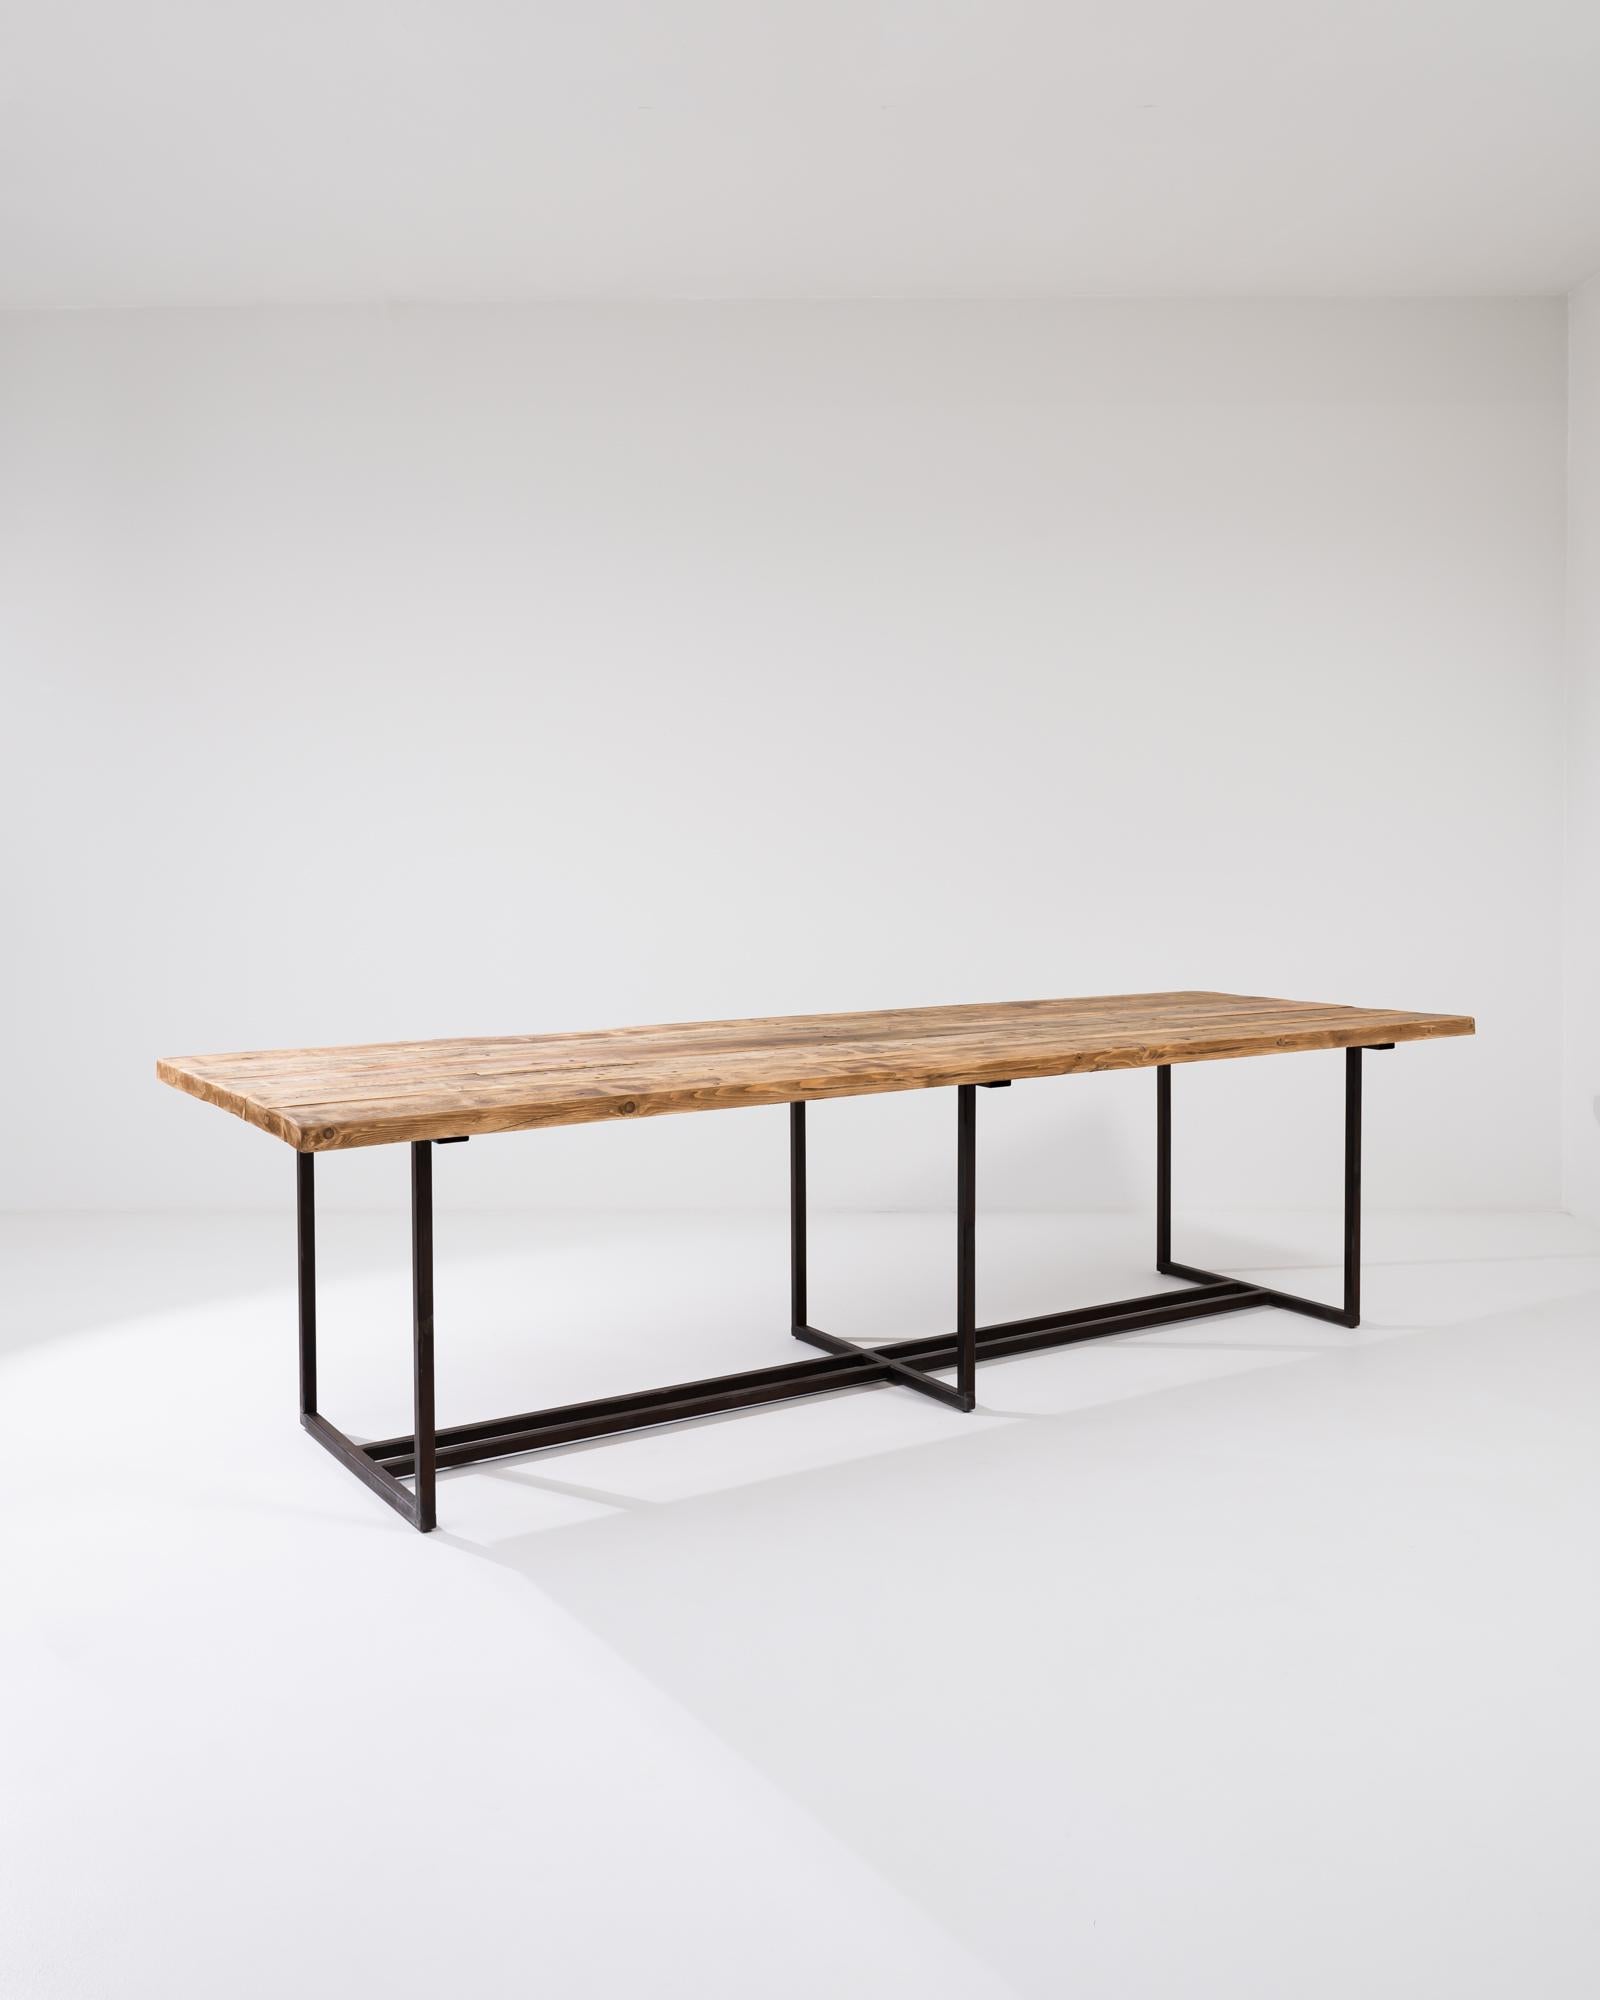 A metal dining table with a vintage wooden top from Central Europe. The time worn wooden top has been outfitted with a minimal metal base in our atelier. The geometric structure is composed with interlocking pairs of legs, the timeless design